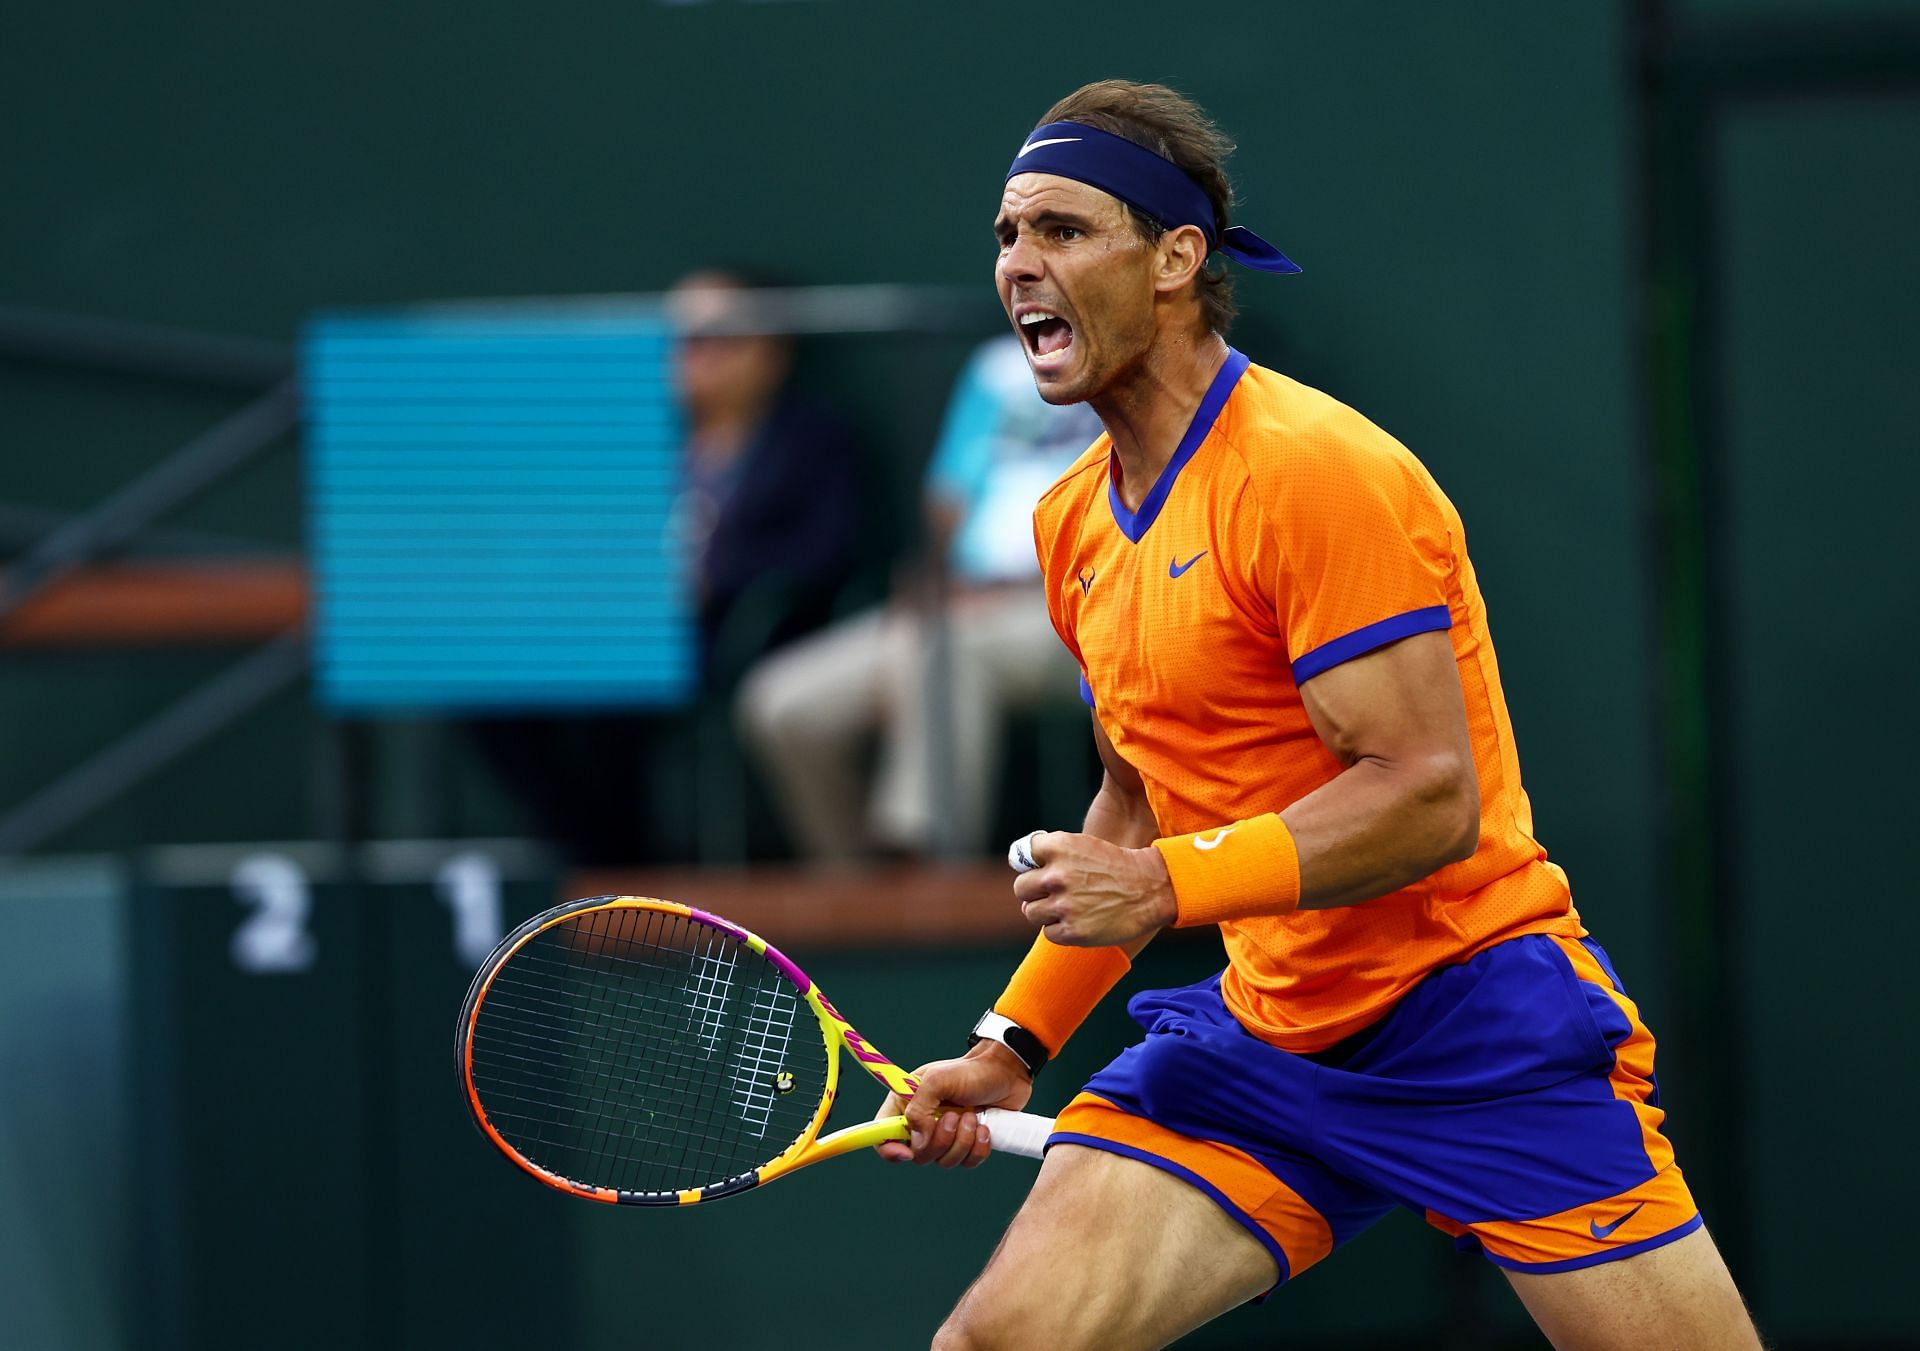 Rafael Nadal has reached his fifth final at Indian Wells